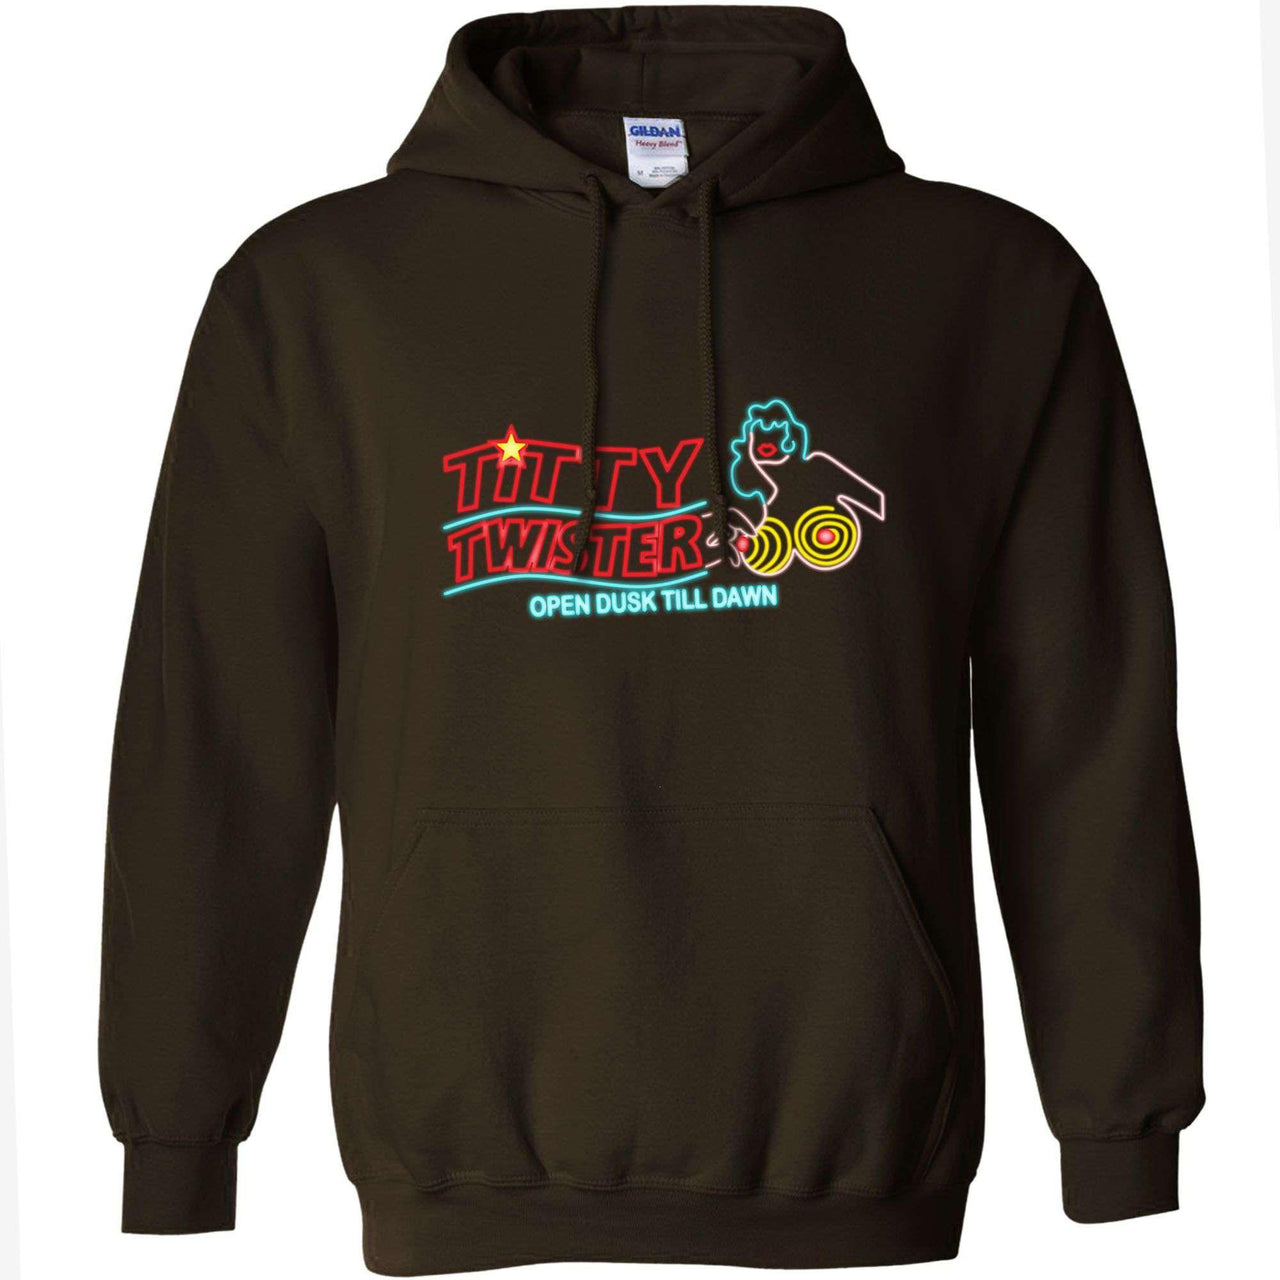 Titty Twister Graphic Hoodie 8Ball